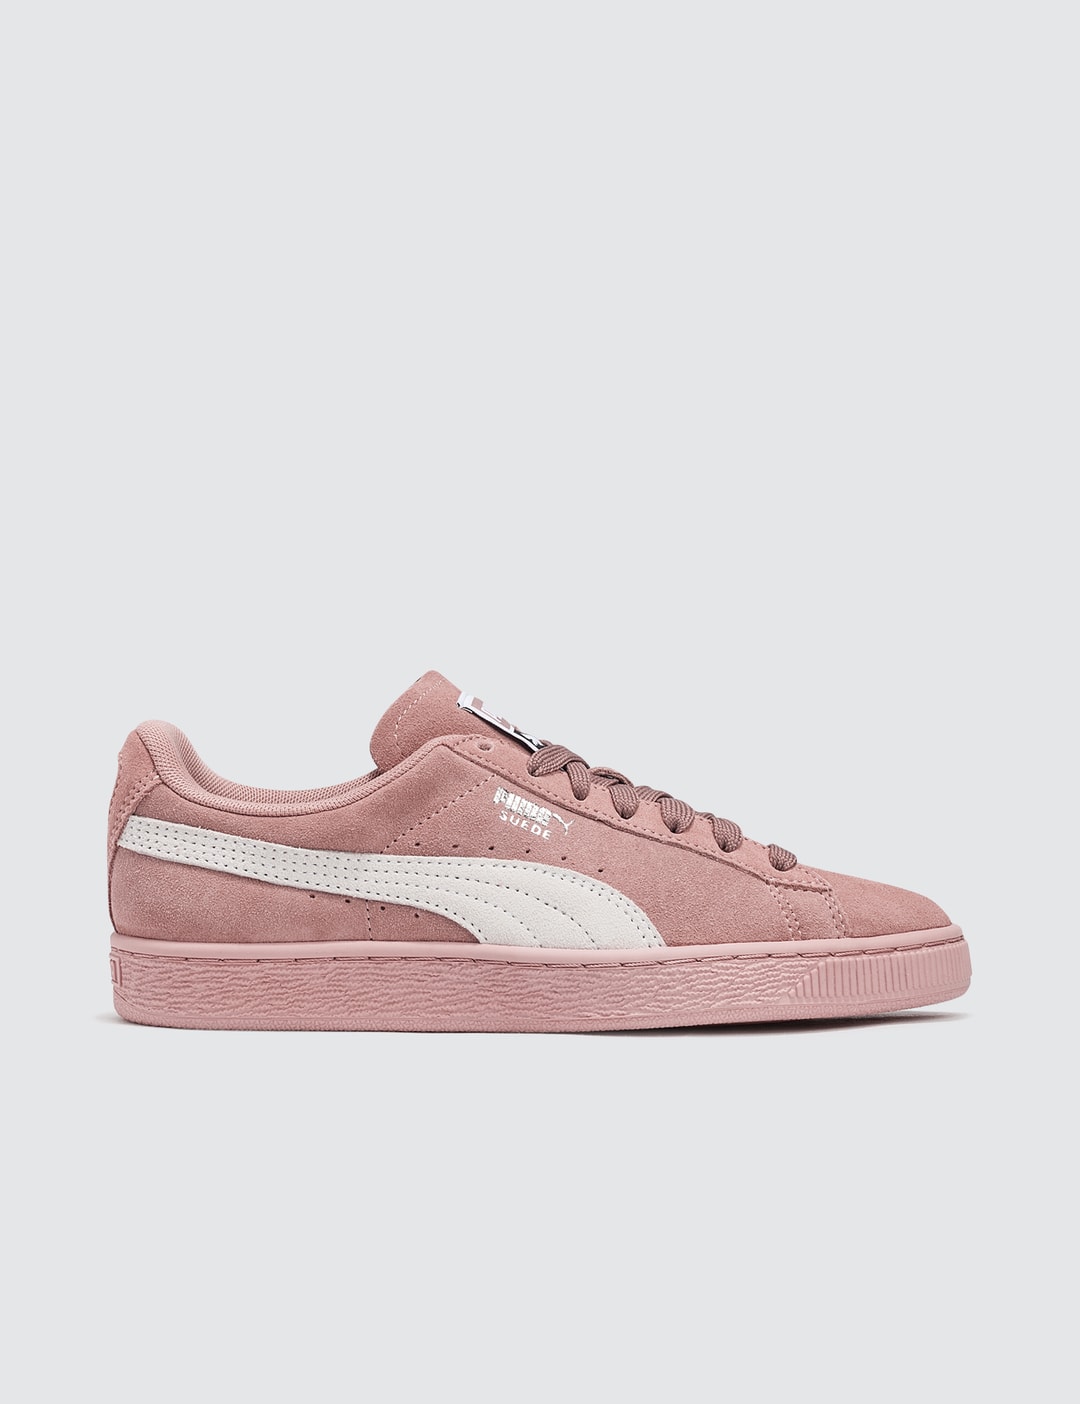 Puma - Suede Classic | HBX - Globally Curated Fashion and Lifestyle by ...